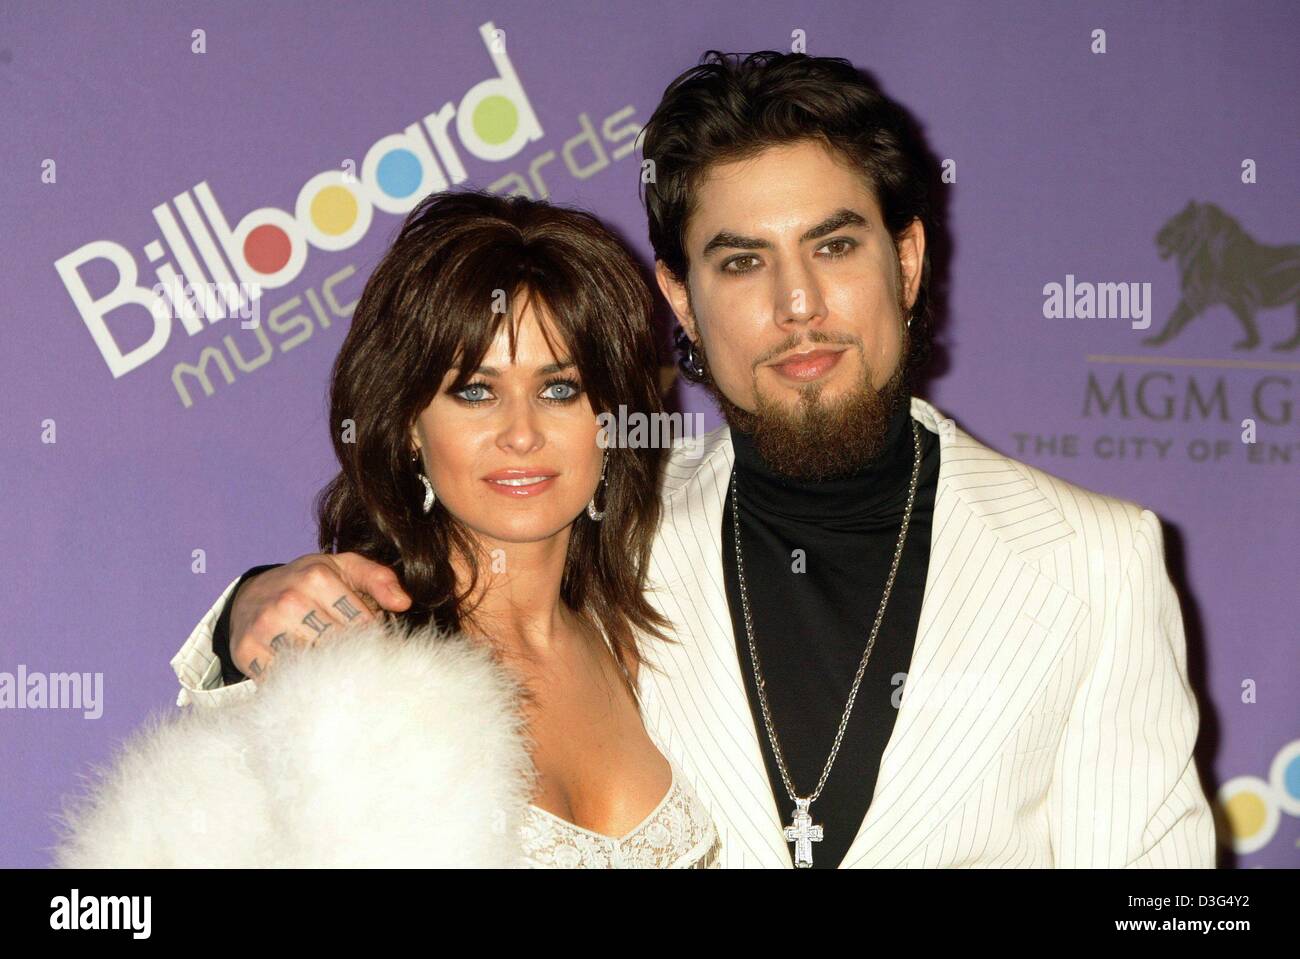 (dpa) - Musician Dave Navarro and his wife, US actress Carmen Electra, pose ahead of the Billboard awards show in Las Vegas, USA, 10 December 2003. The awards of the US music magazine Billboard were awarded for the 14th time. Stock Photo